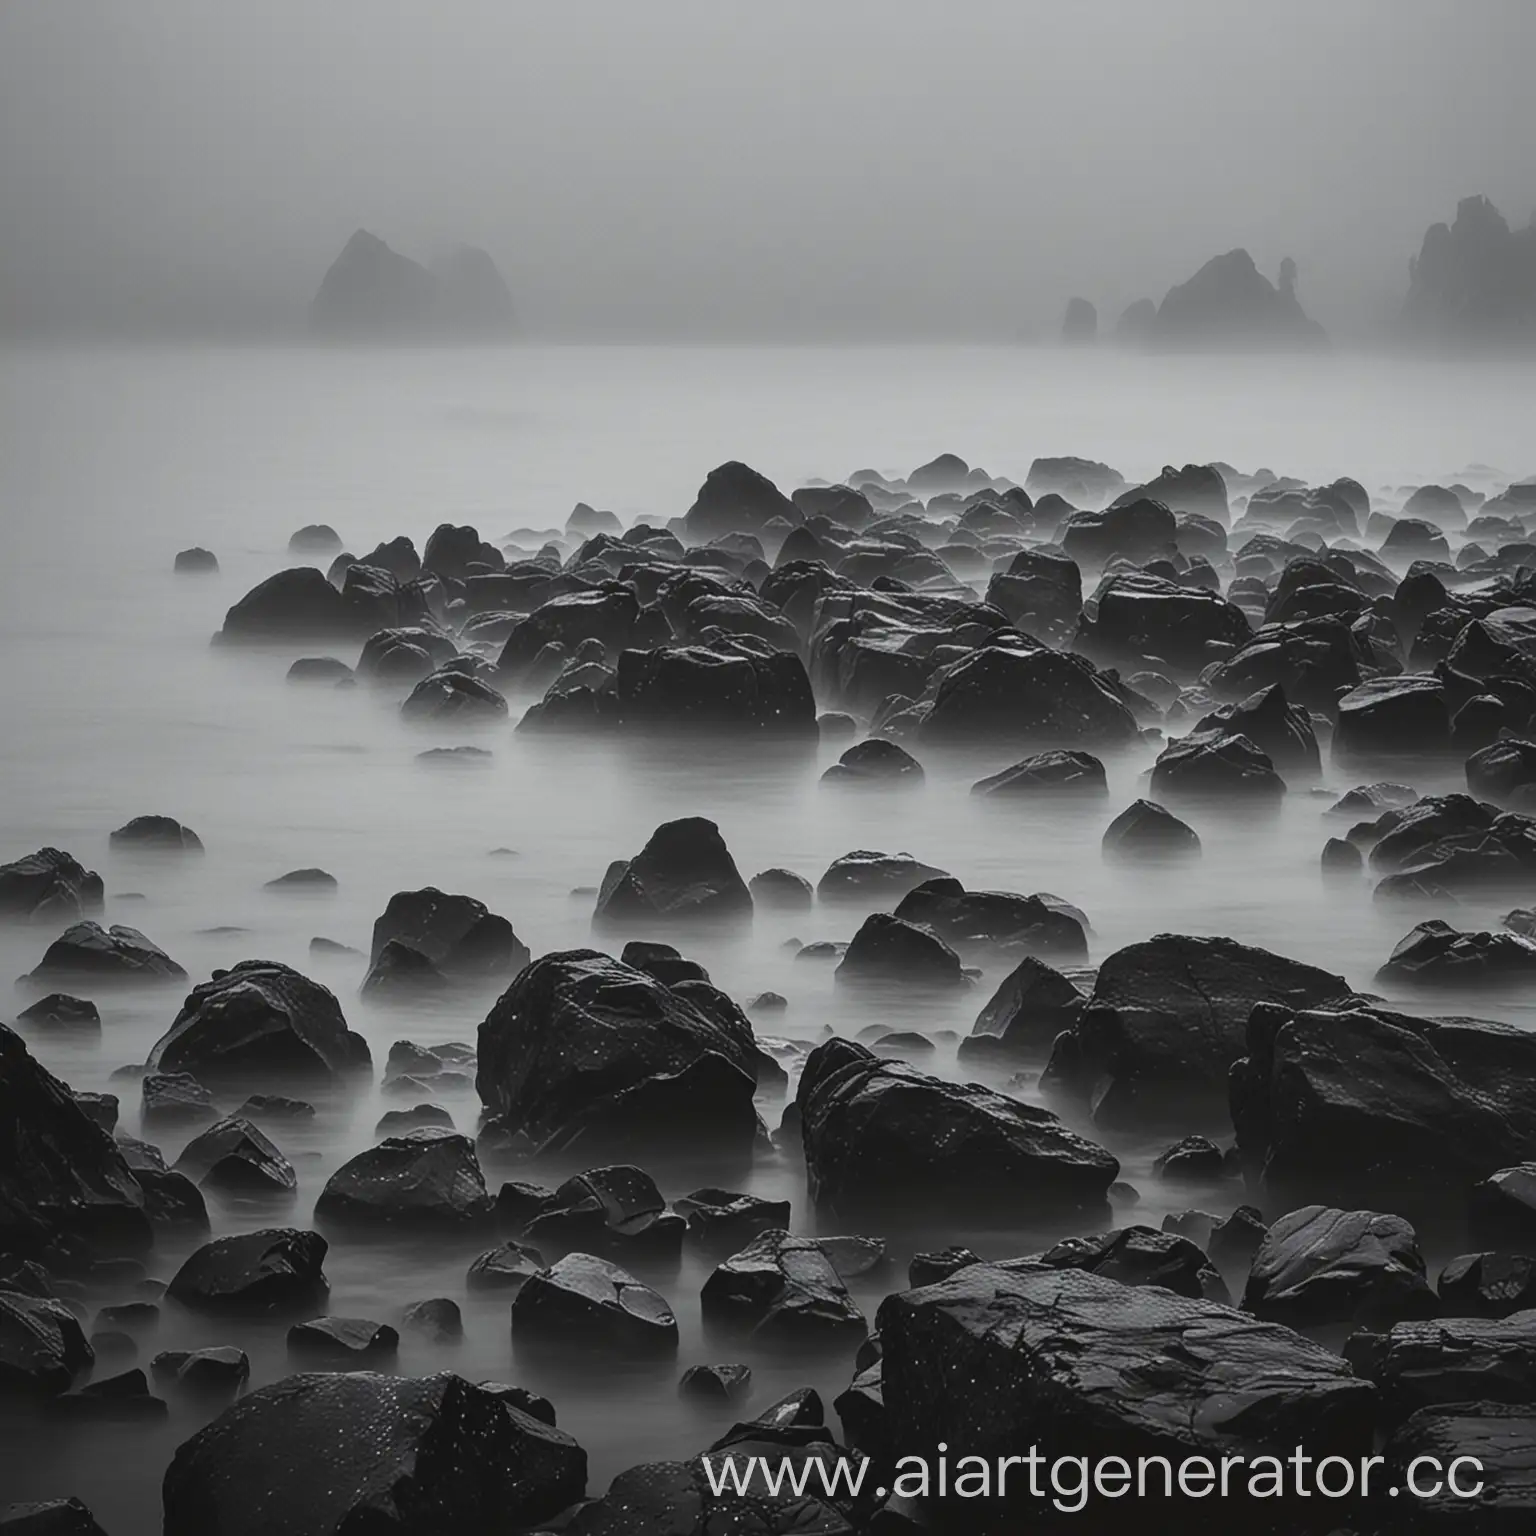 Mysterious-Black-Rocks-Emerging-from-the-Fog